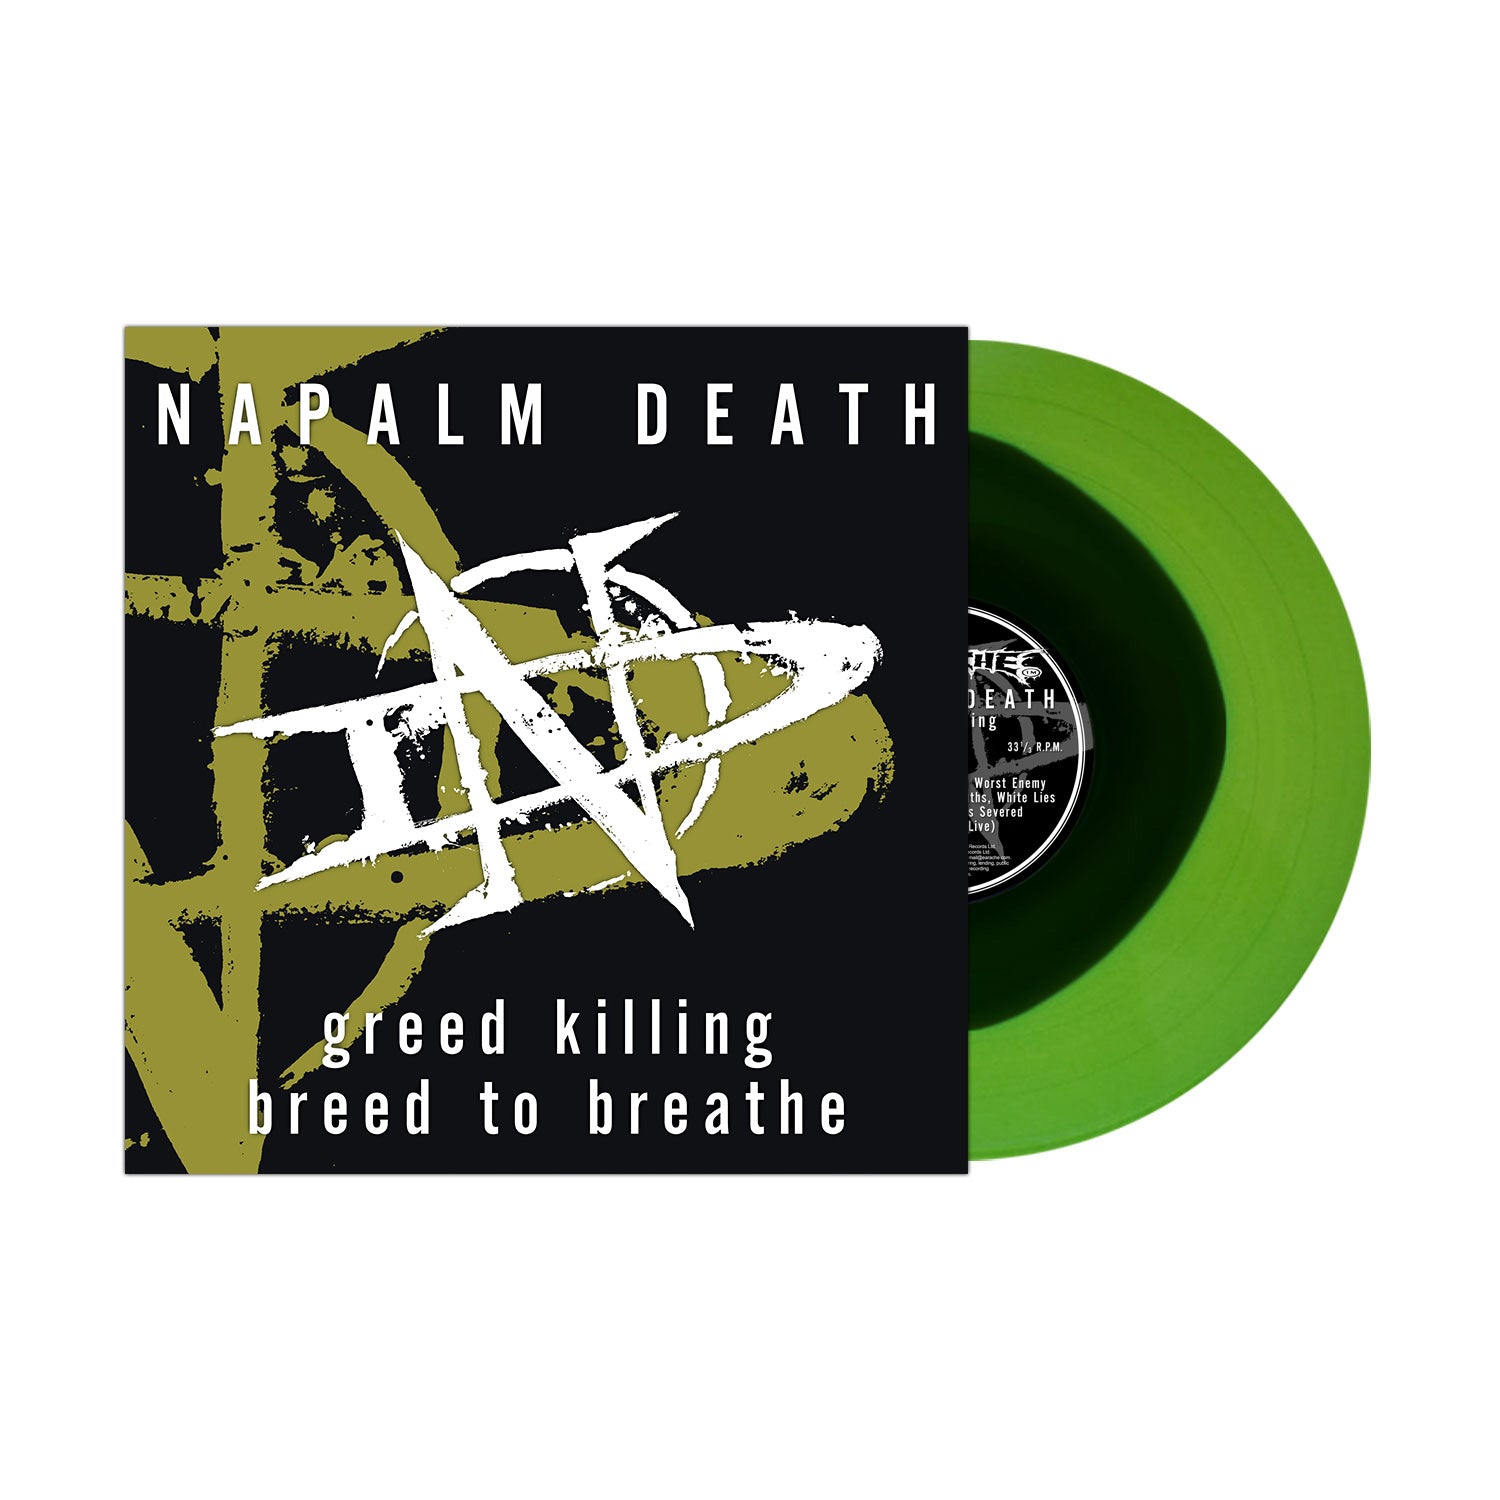 Napalm Death "Greed Killing / Breed To Breathe" Black in Green Vinyl